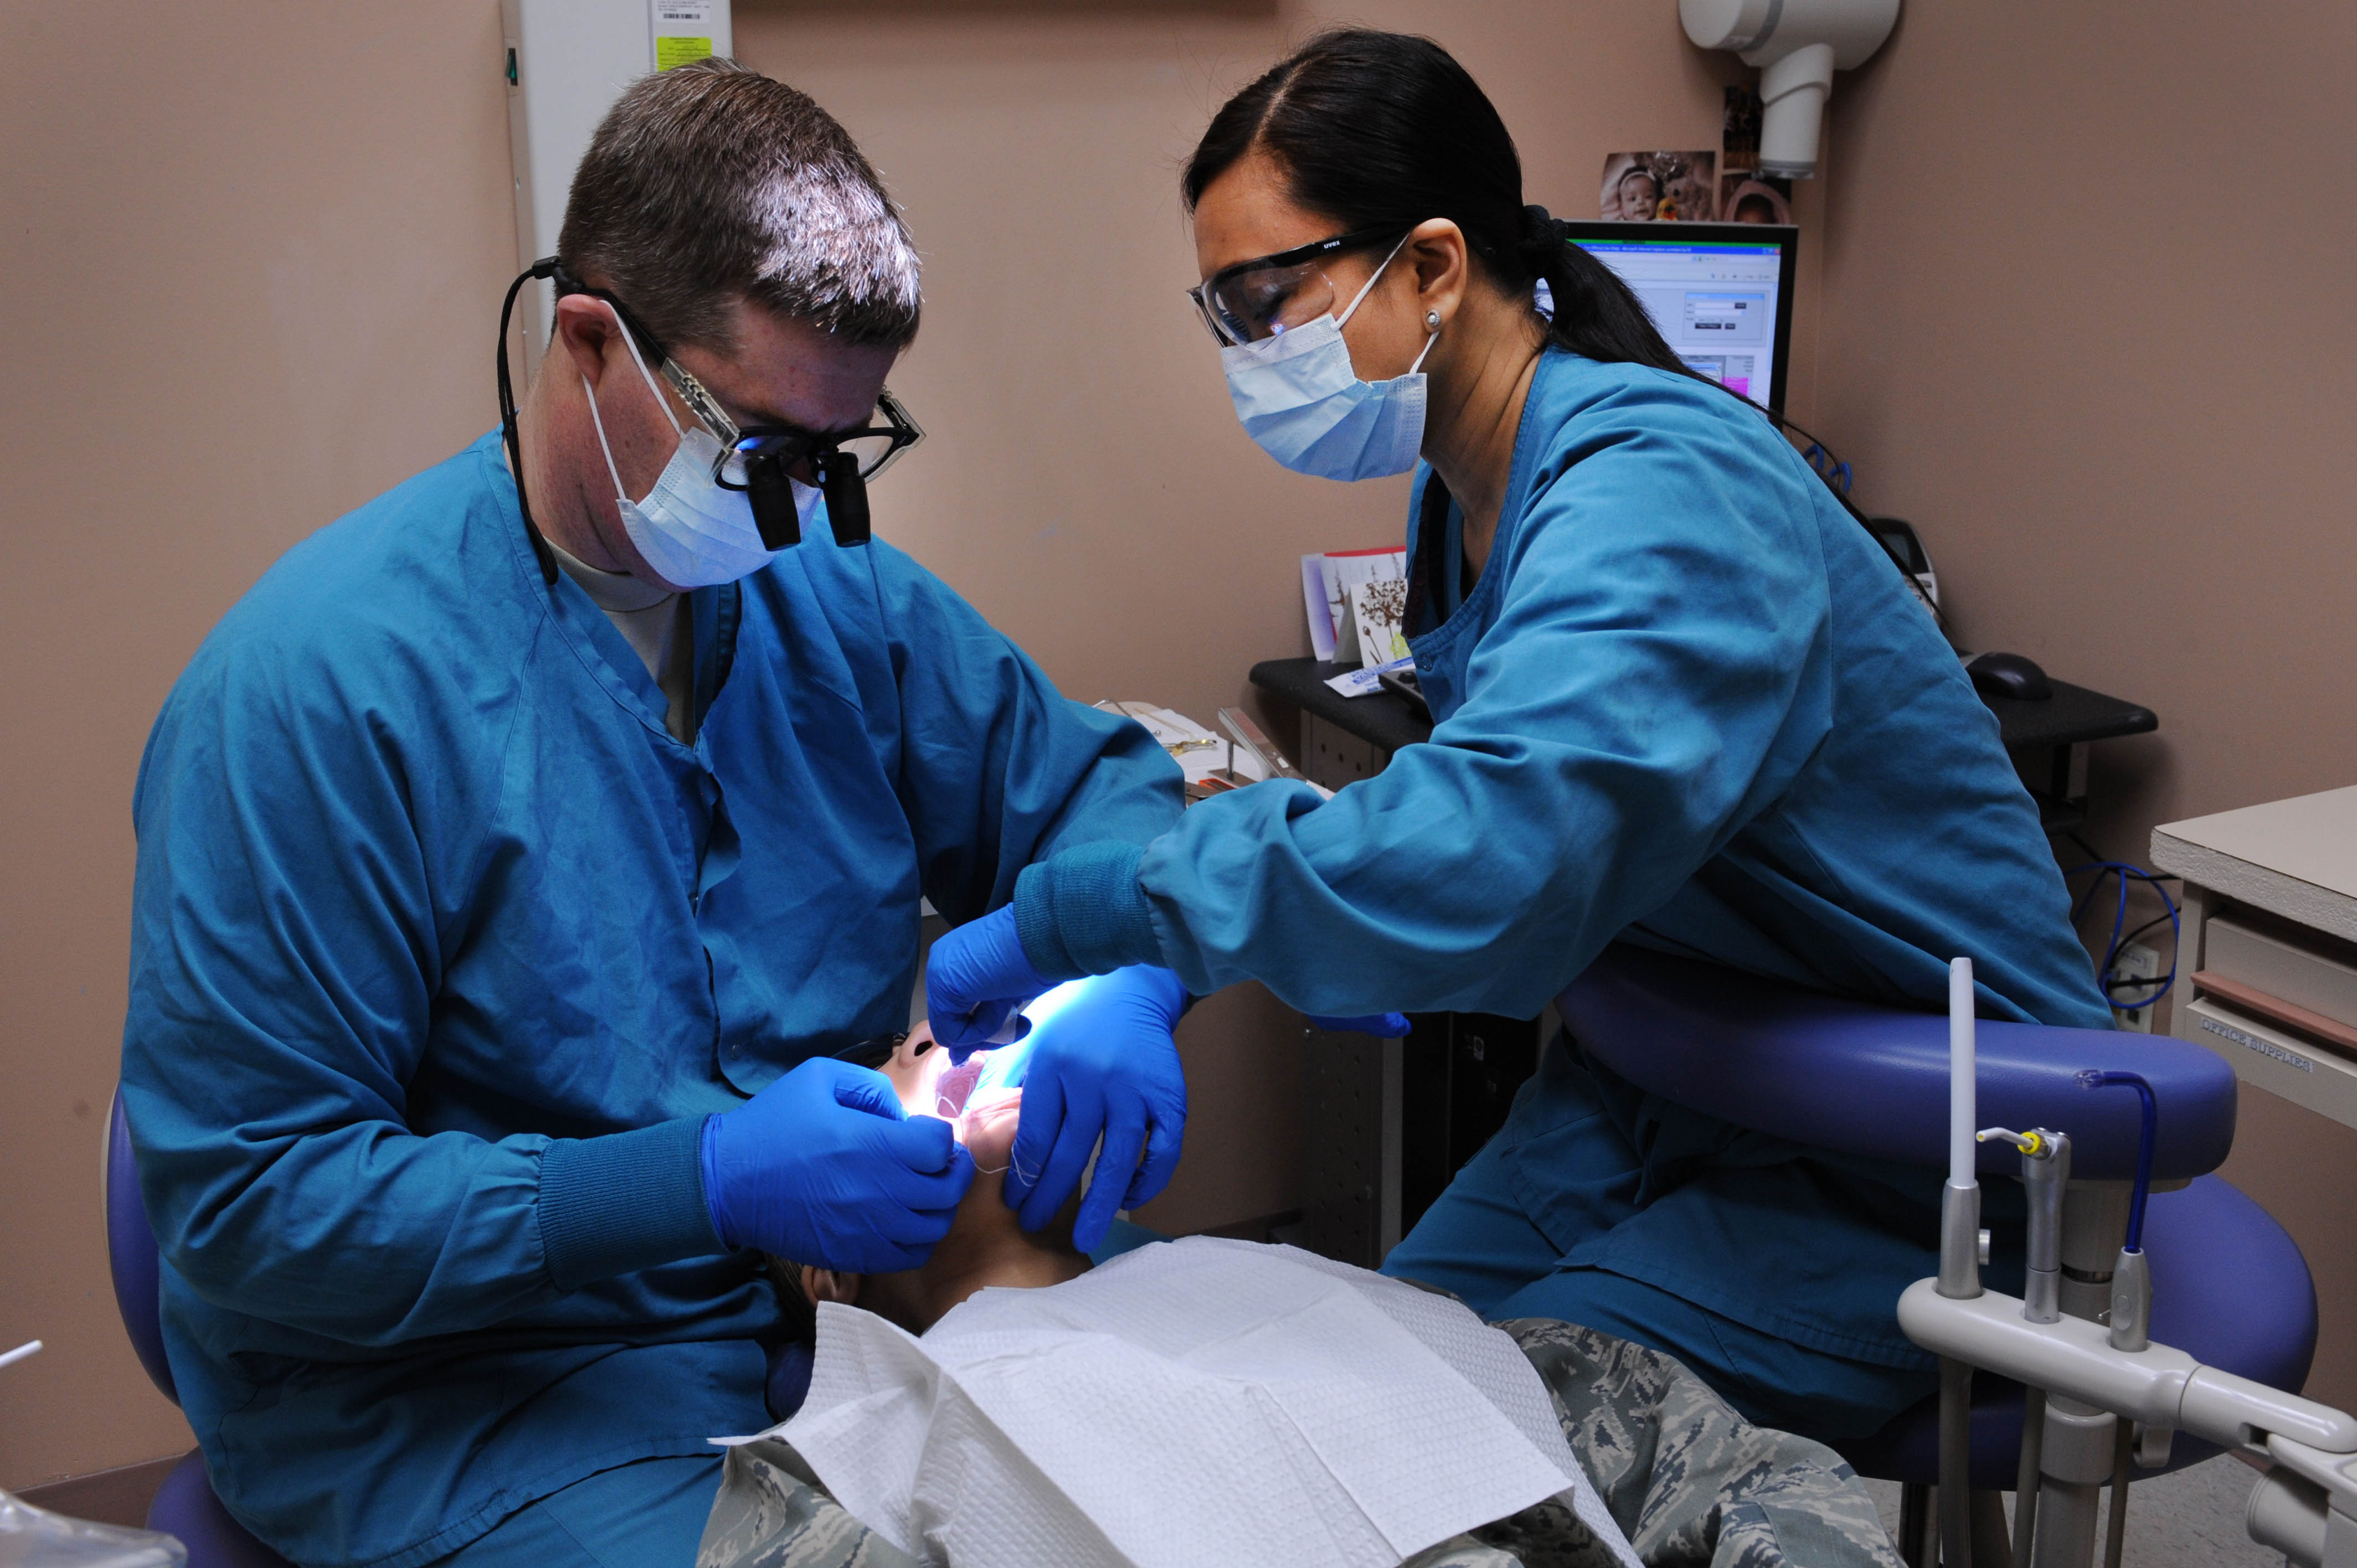 NELLIS AIR FORCE BASE, Nev.-- Maj. Matthew Huffaker, 99th Dental Squadron, dentist, and Maria Pabala, a Red Cross volunteer, examine a patient at the Michael O'Callihan Federal Hospital Jan. 25. Pabala volunteers an estimated 40 hours a week while training to become a dentist assistant.  (U.S. Air Force photo by Airman 1st Class Matthew Lancaster)